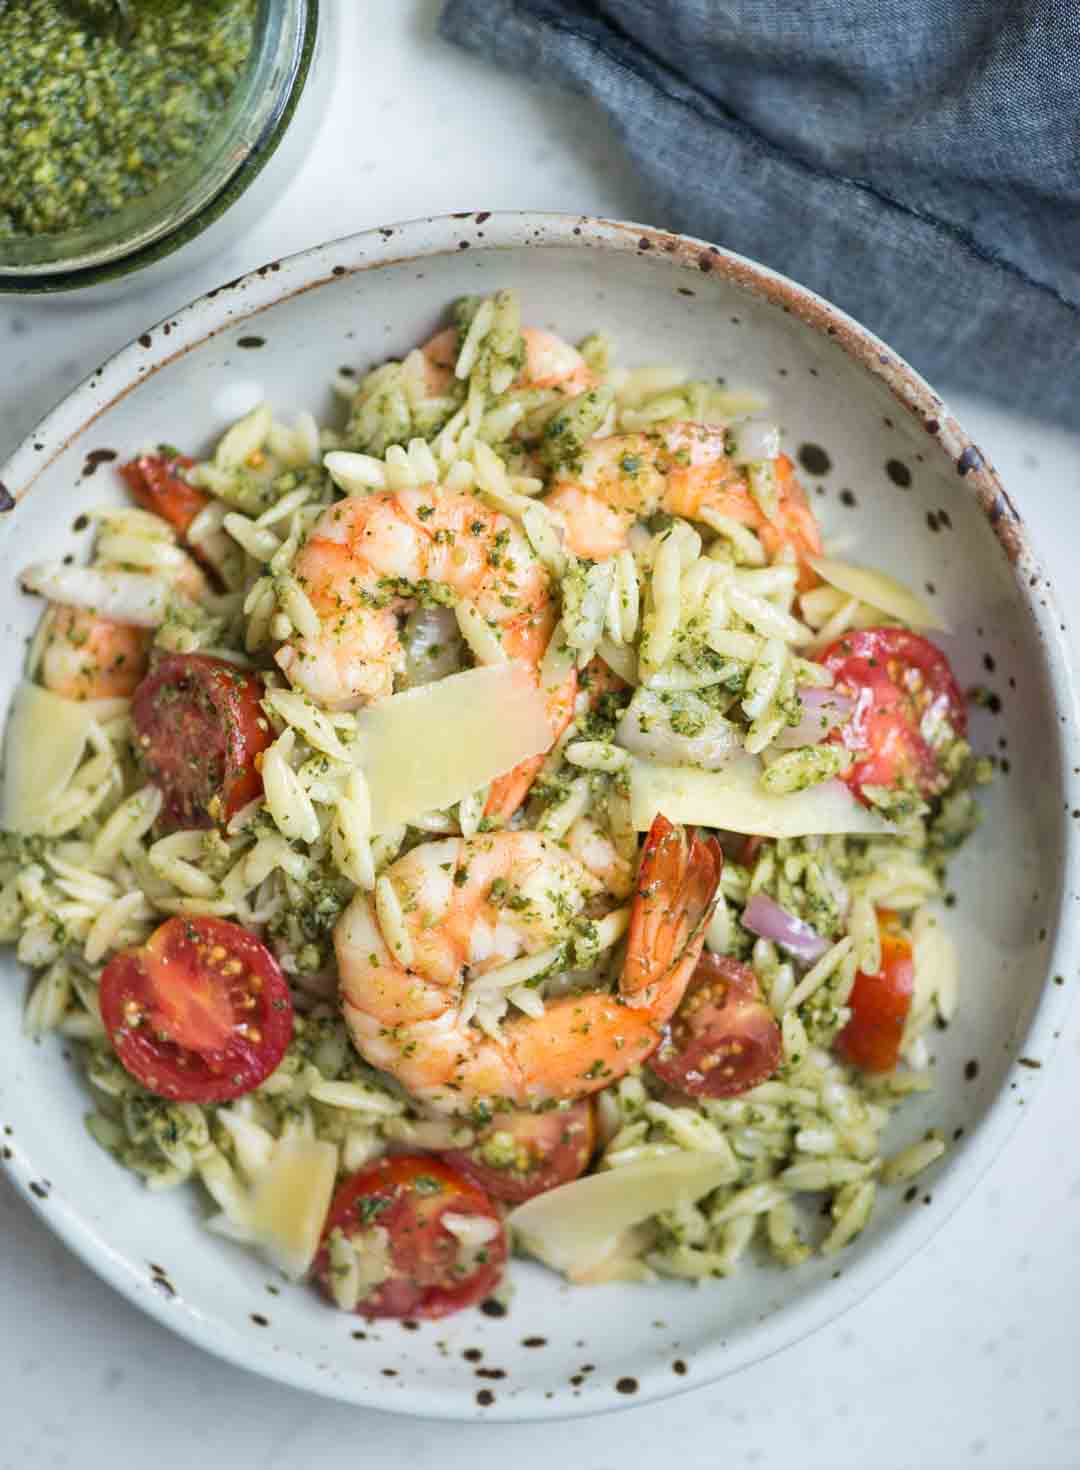 Orzo salad is loaded with Juicy shrimp, cherry tomatoes, onion and everything is tossed in fresh basil pesto. This refreshing salad can be served as a main dish or as a side dish in summer barbeque.